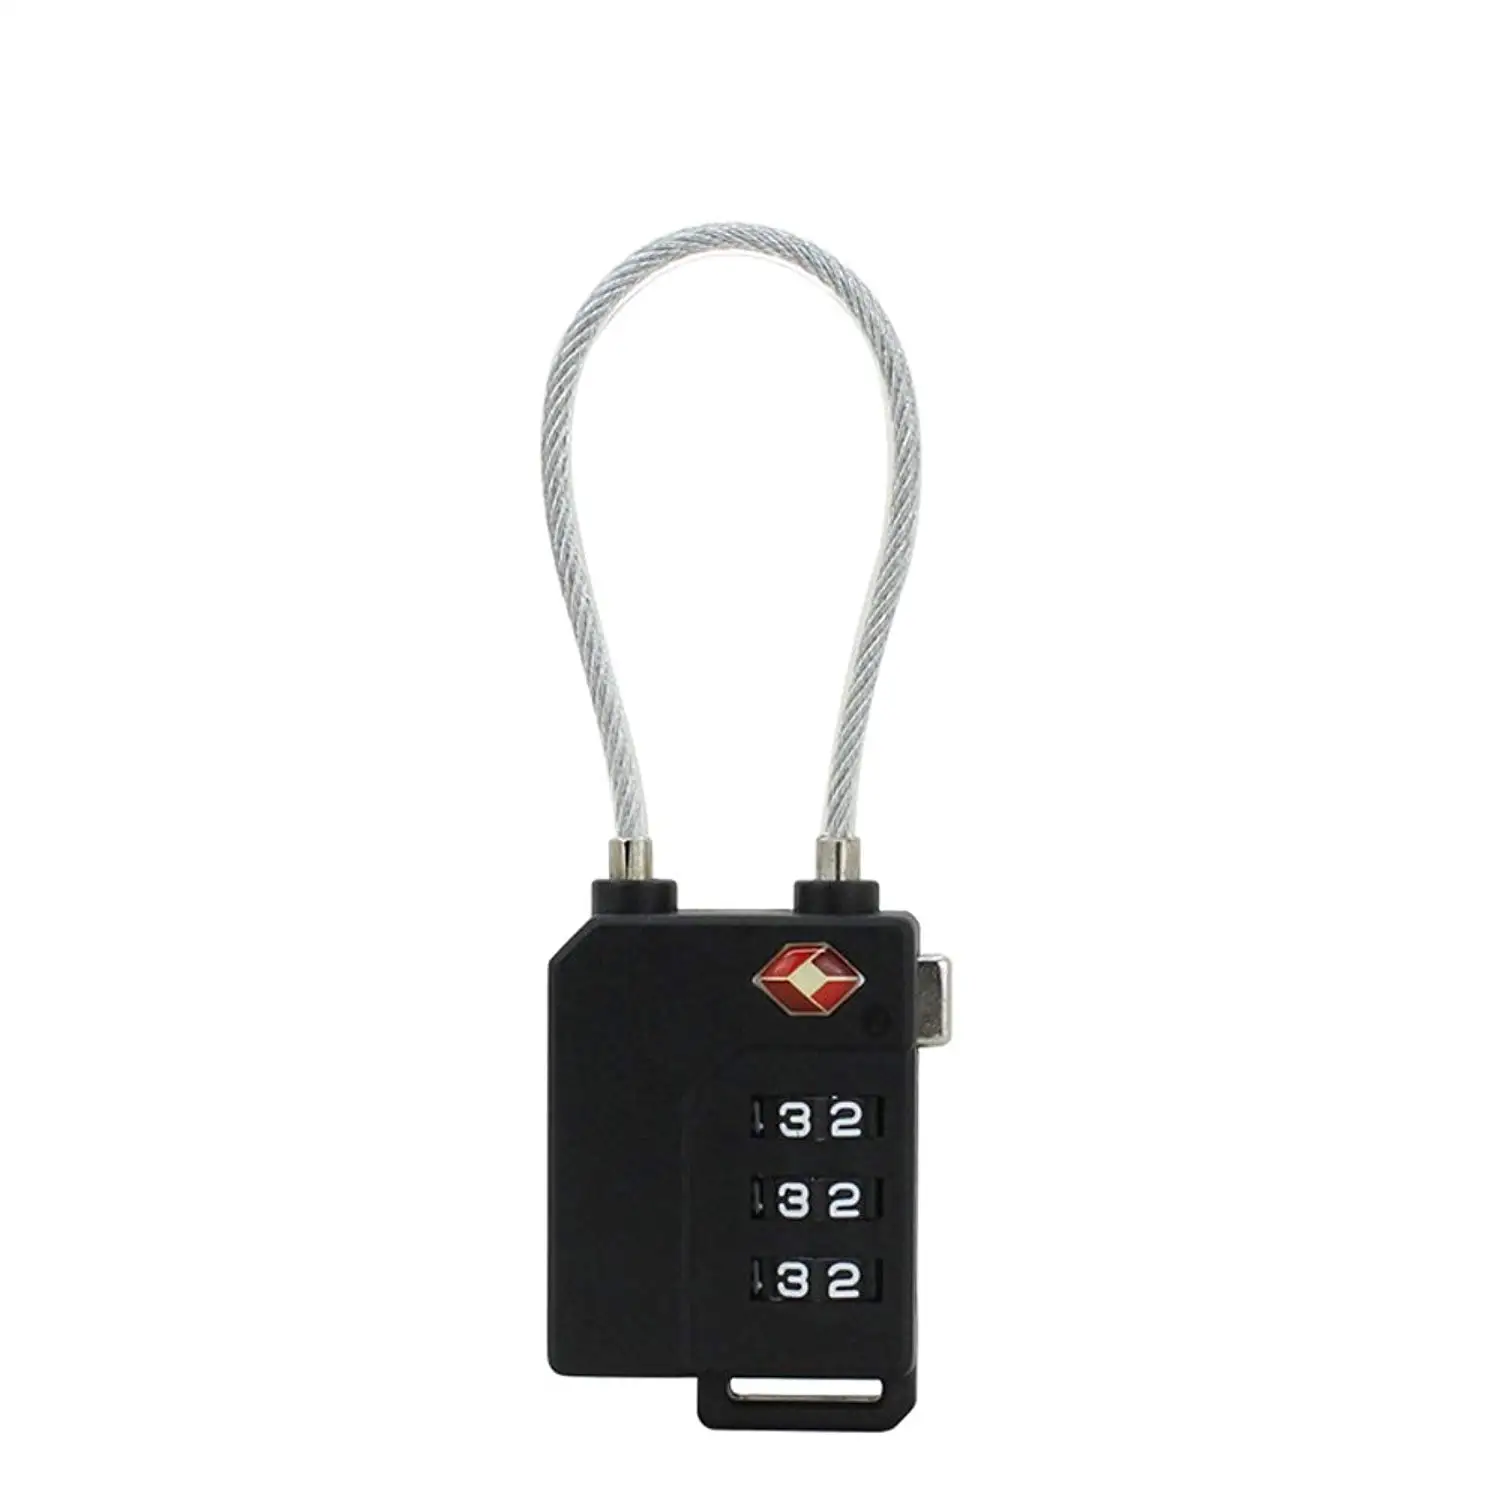 Cheap S G Combination Lock, find S G Combination Lock deals on line at ...